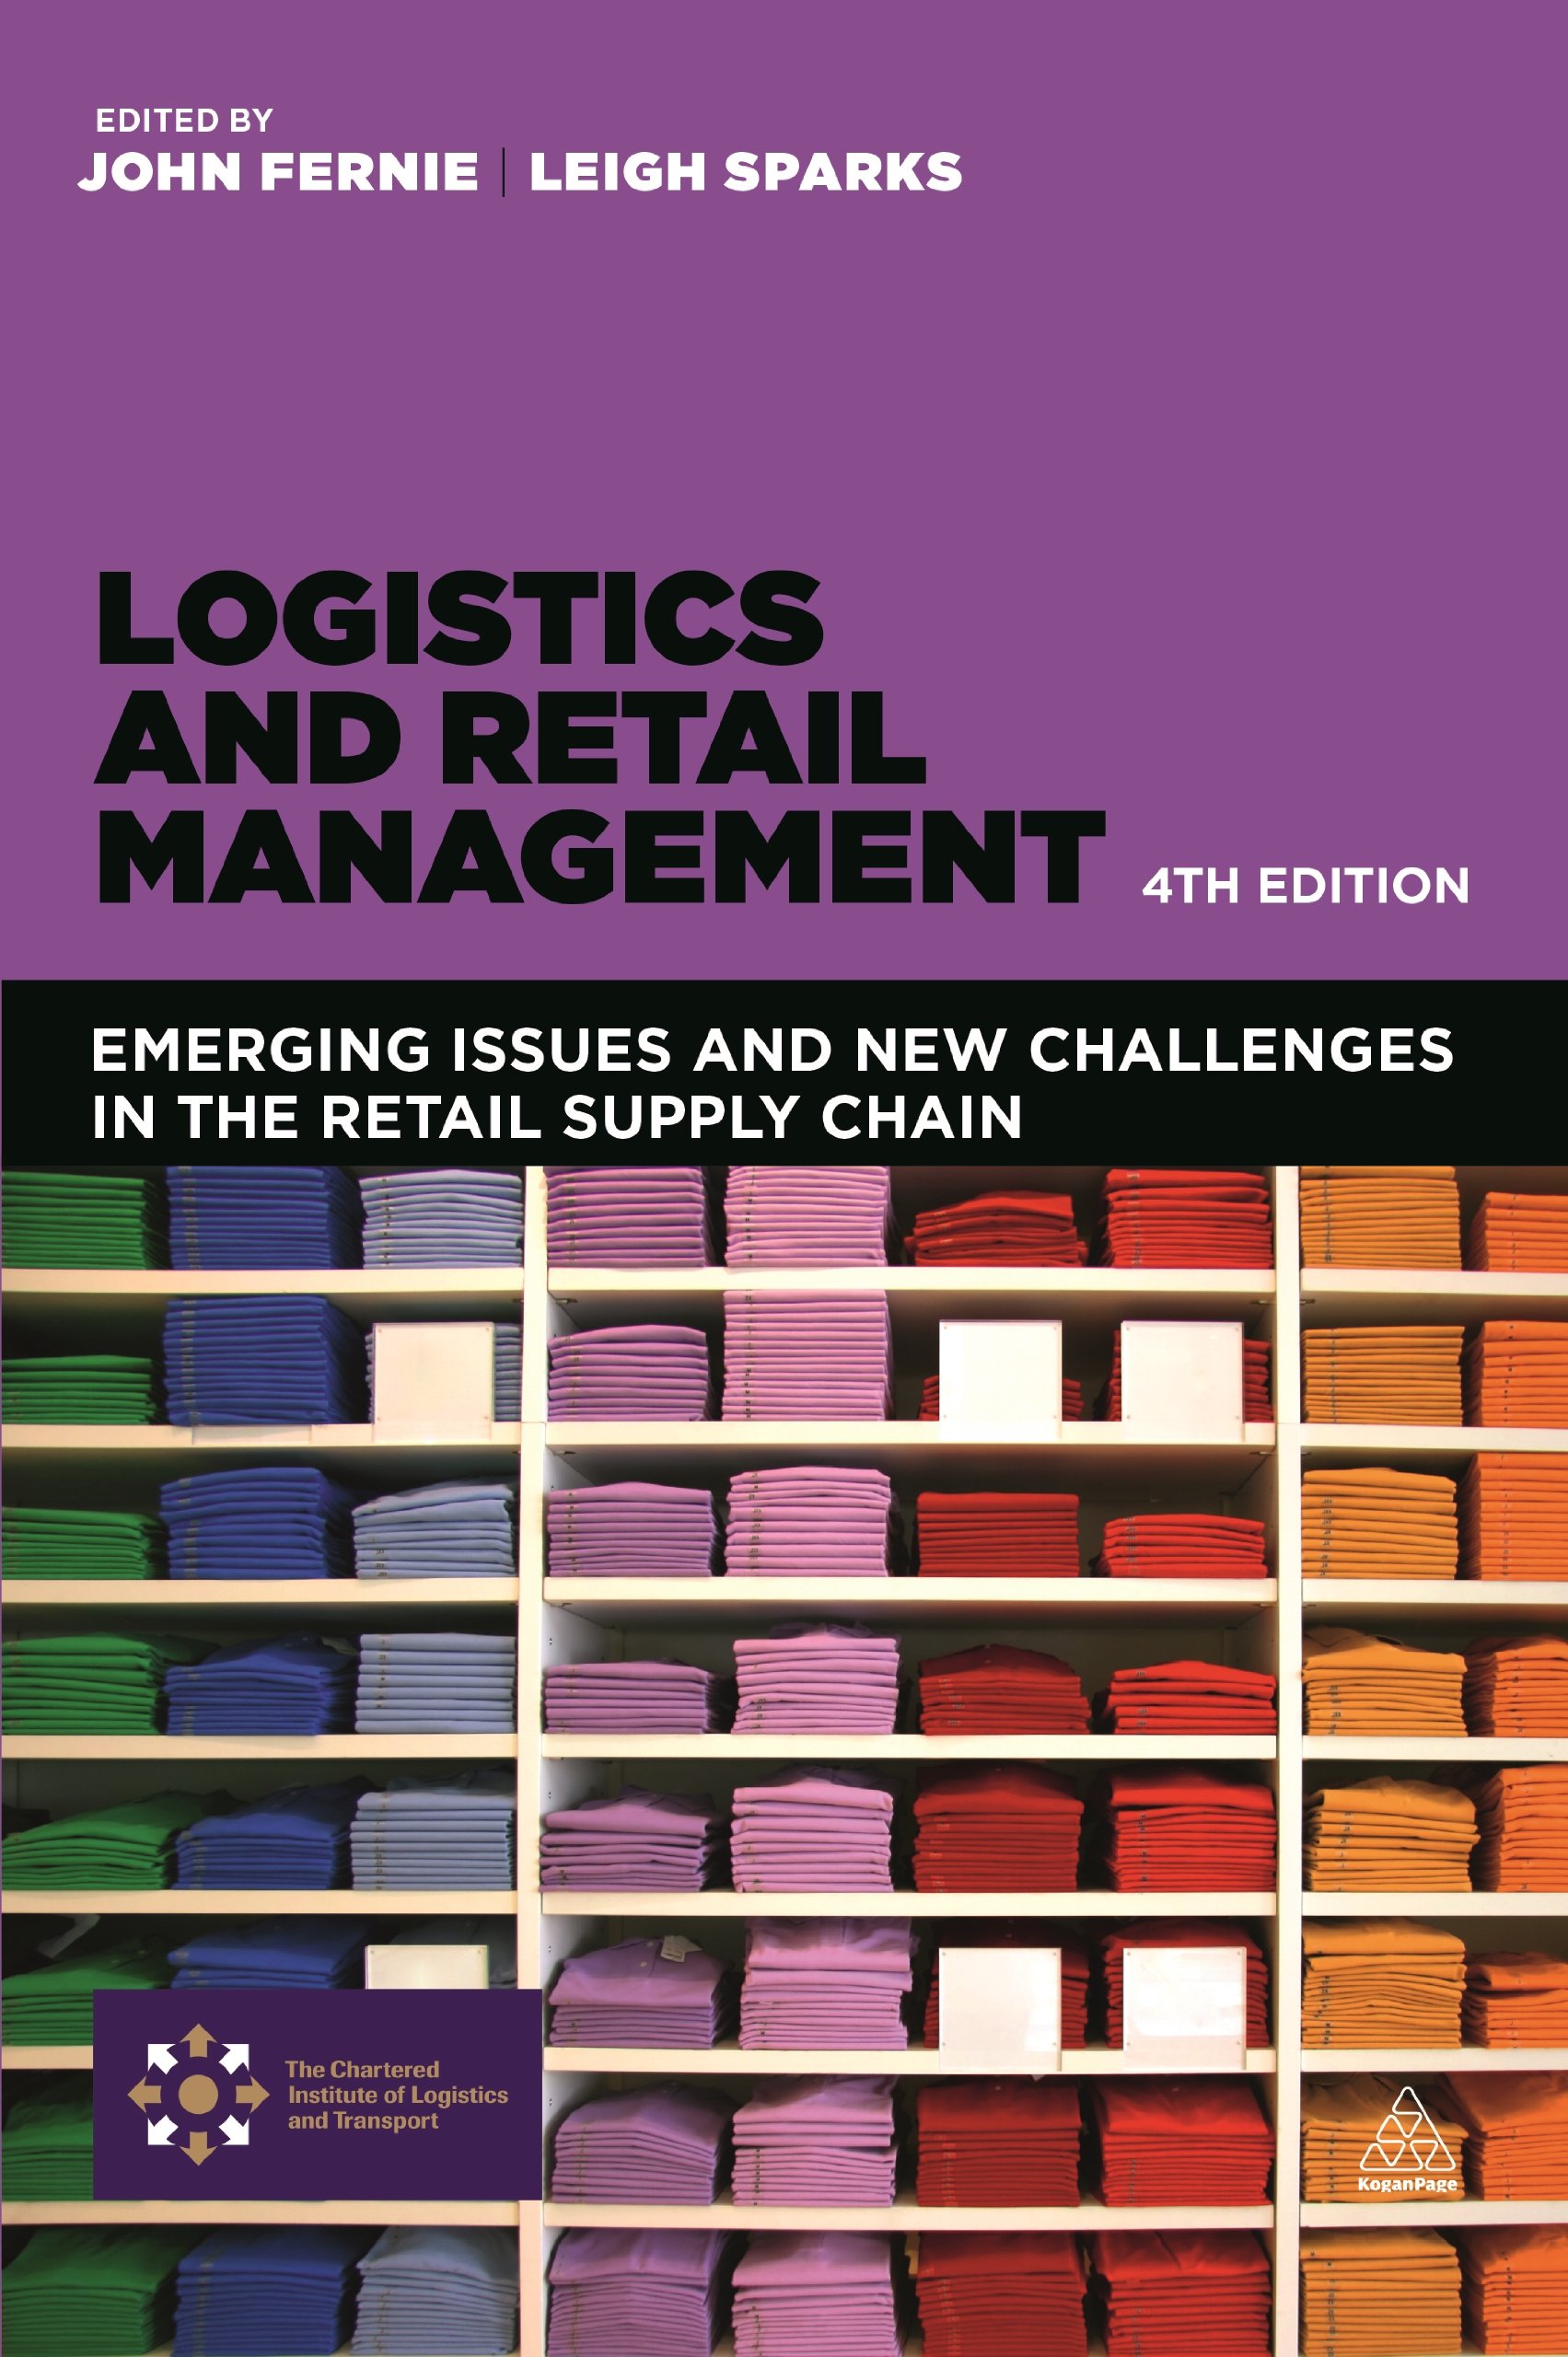 Logistics and Retail Management Emerging issues and new challenges in the retail supply chain